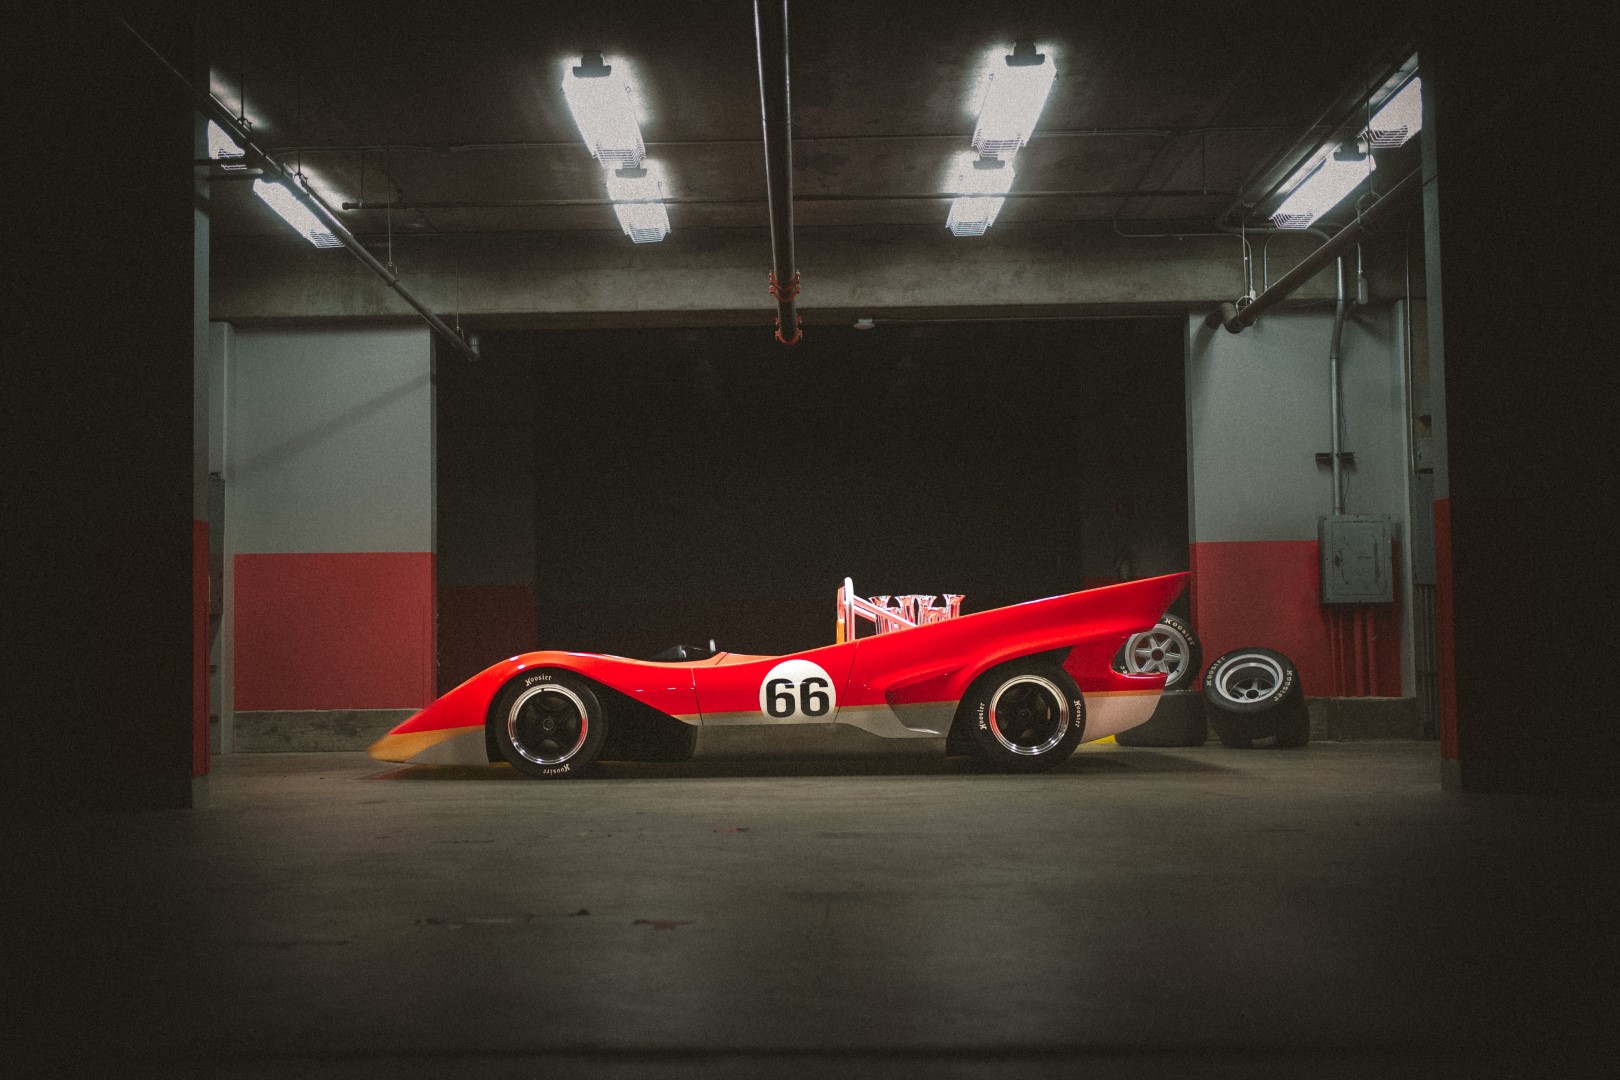 Lotus brings the Type 66 back to life